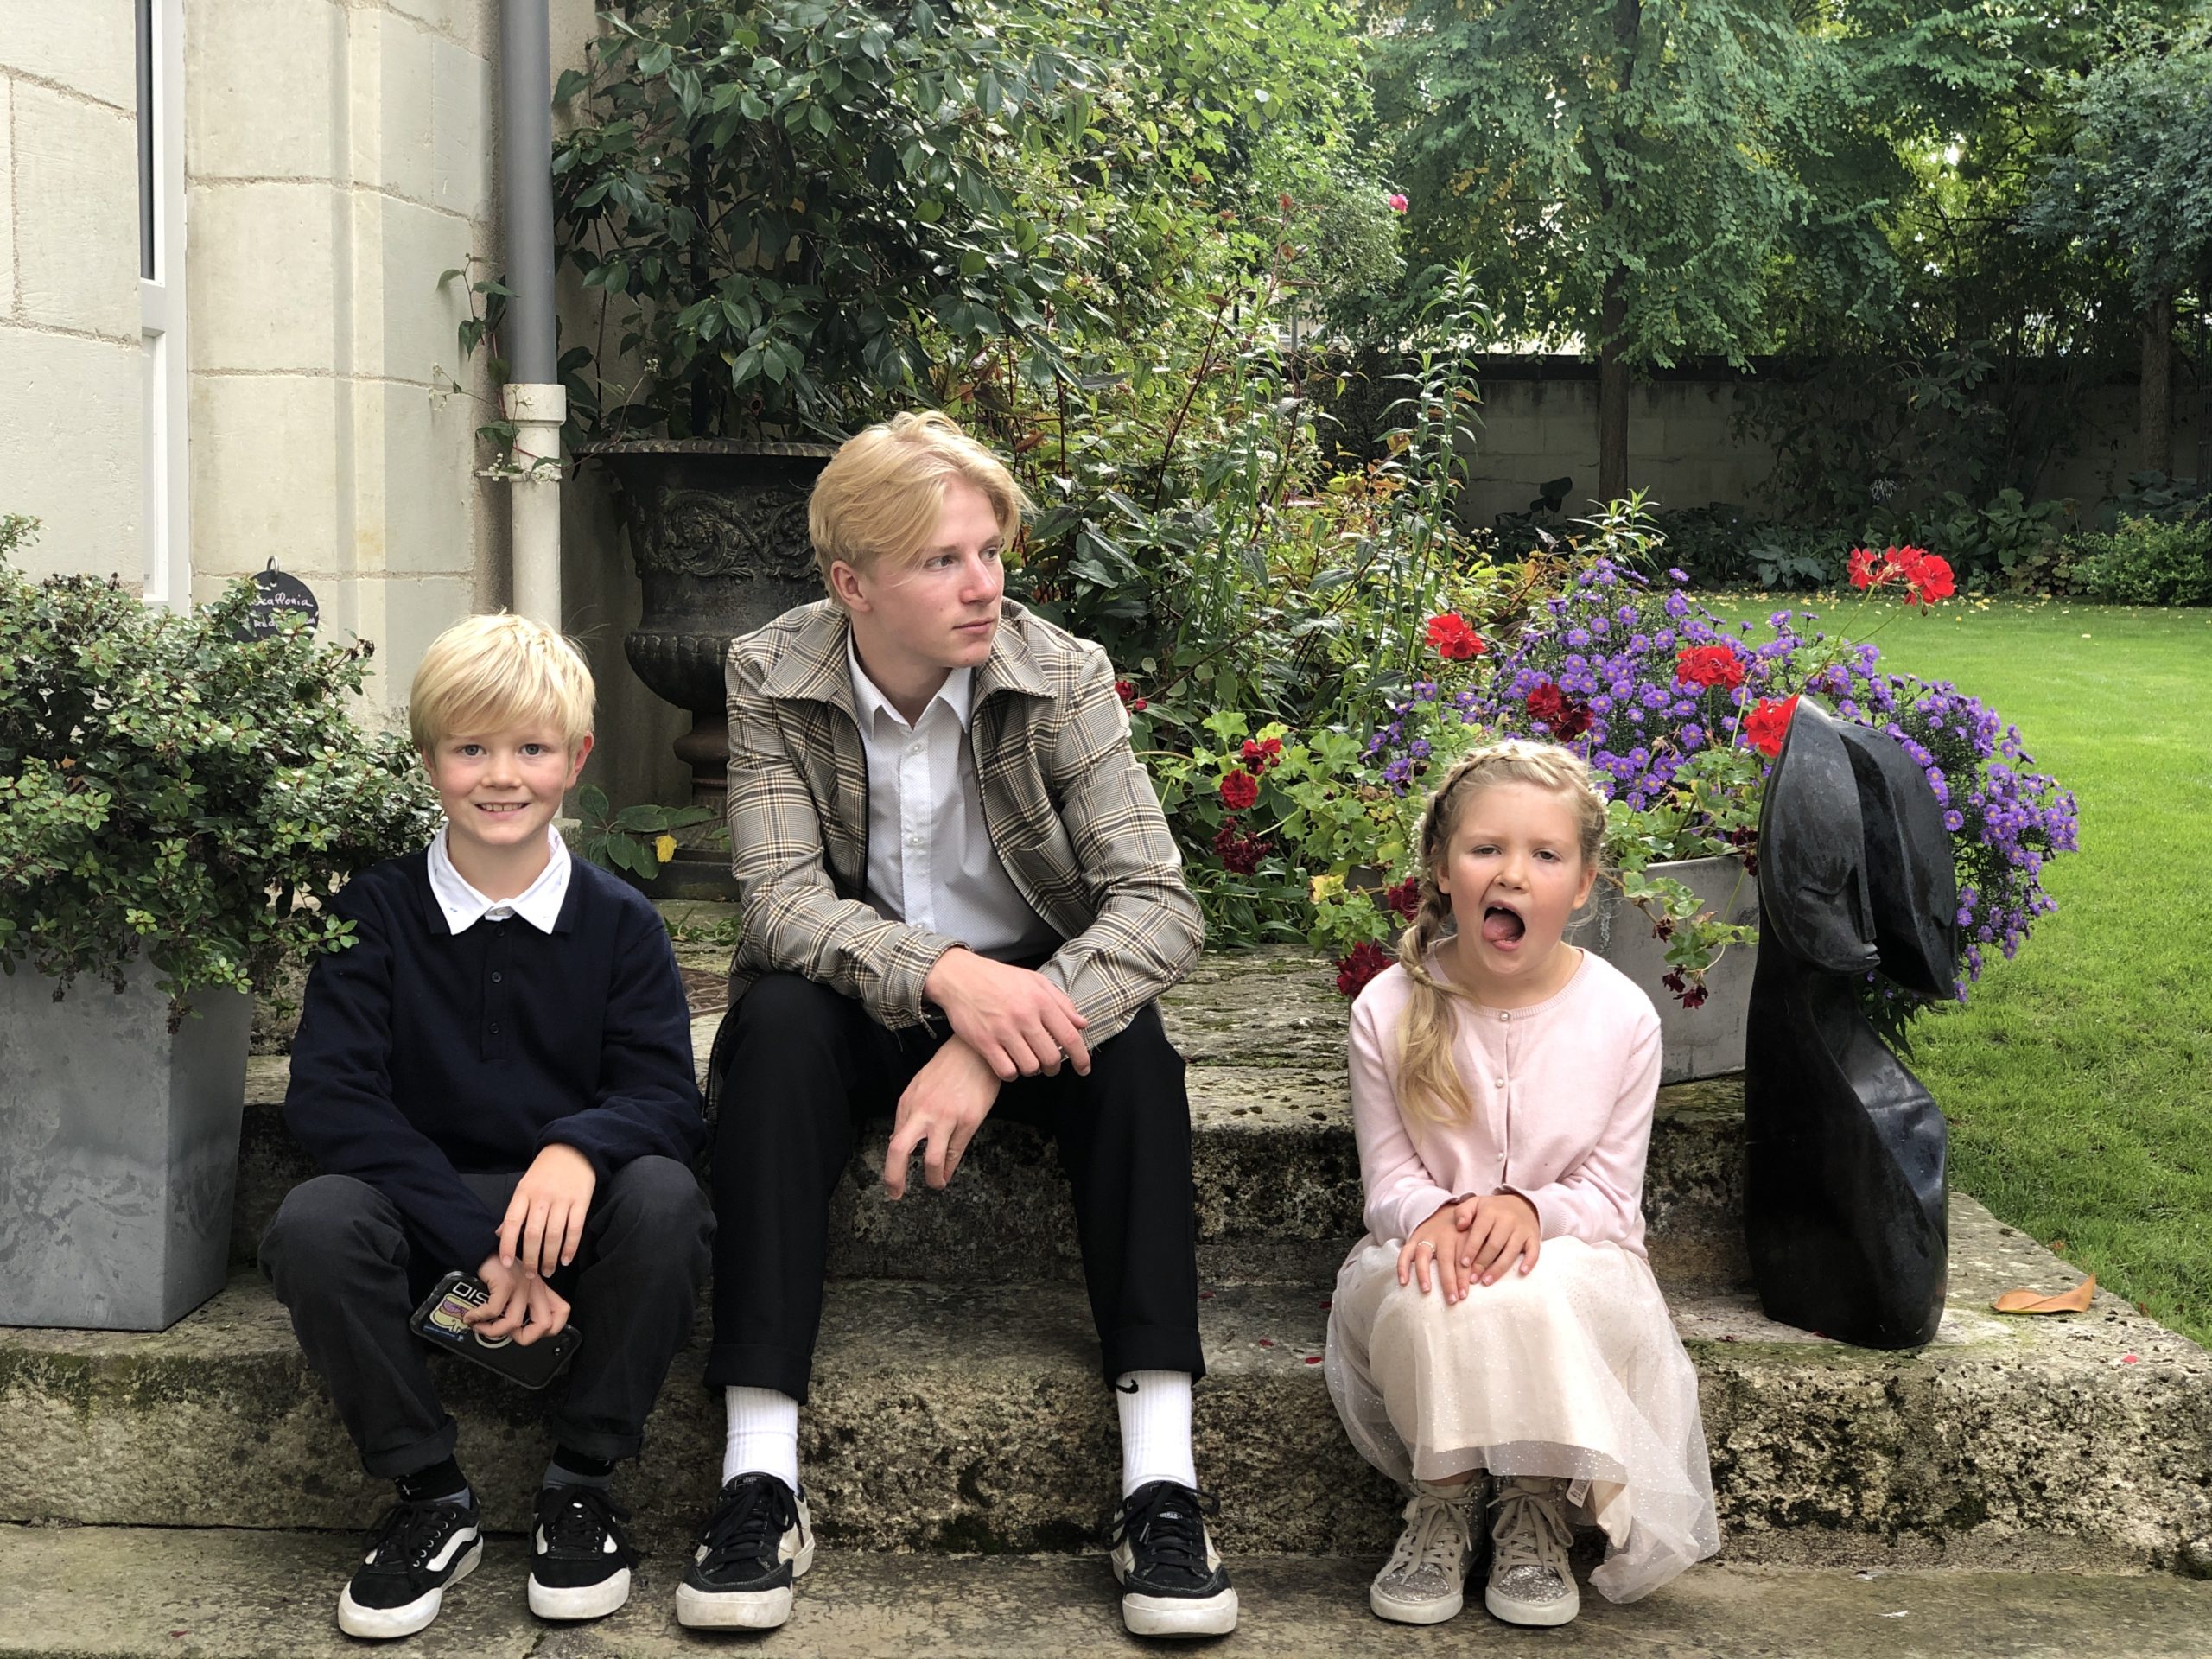 Kids dressed up for a french wedding